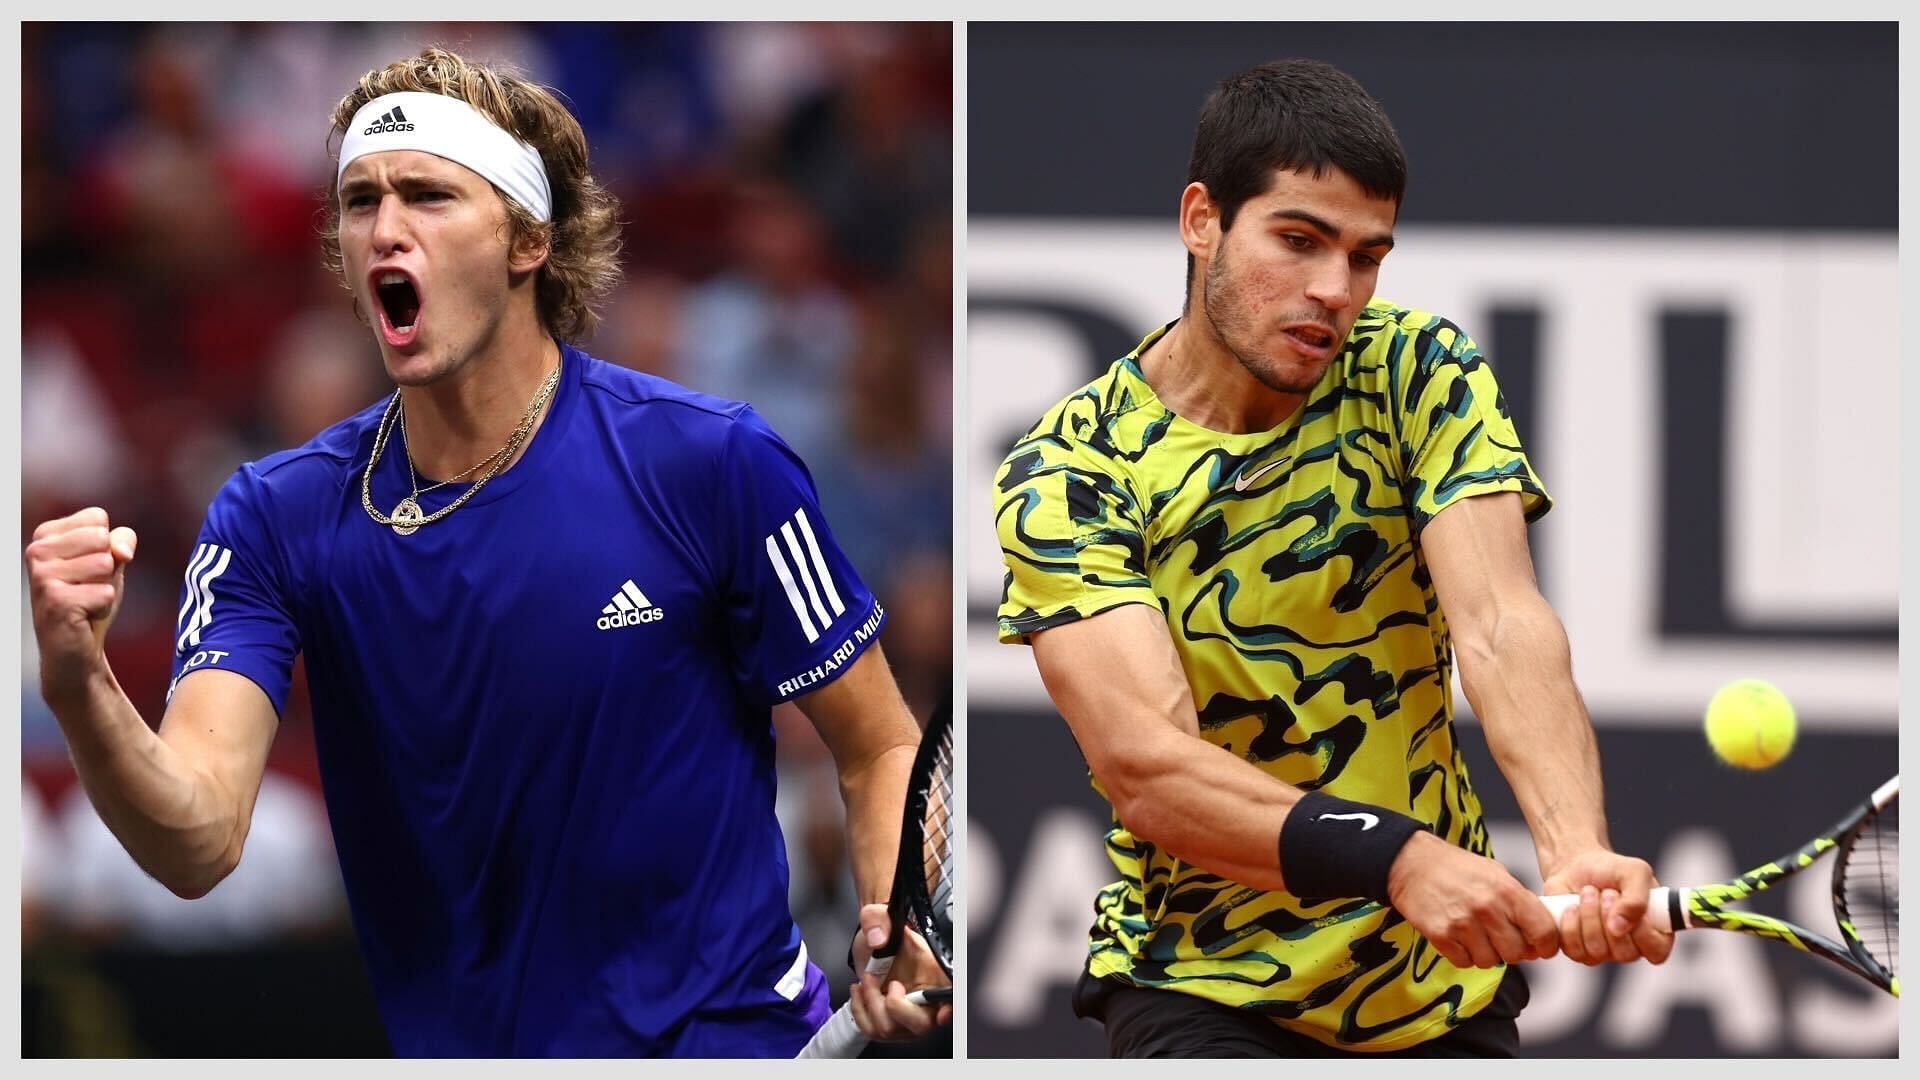 Alexander Zverev vs Carlos Alcaraz is one of the quarterfinal matches at the 2023 US Open.